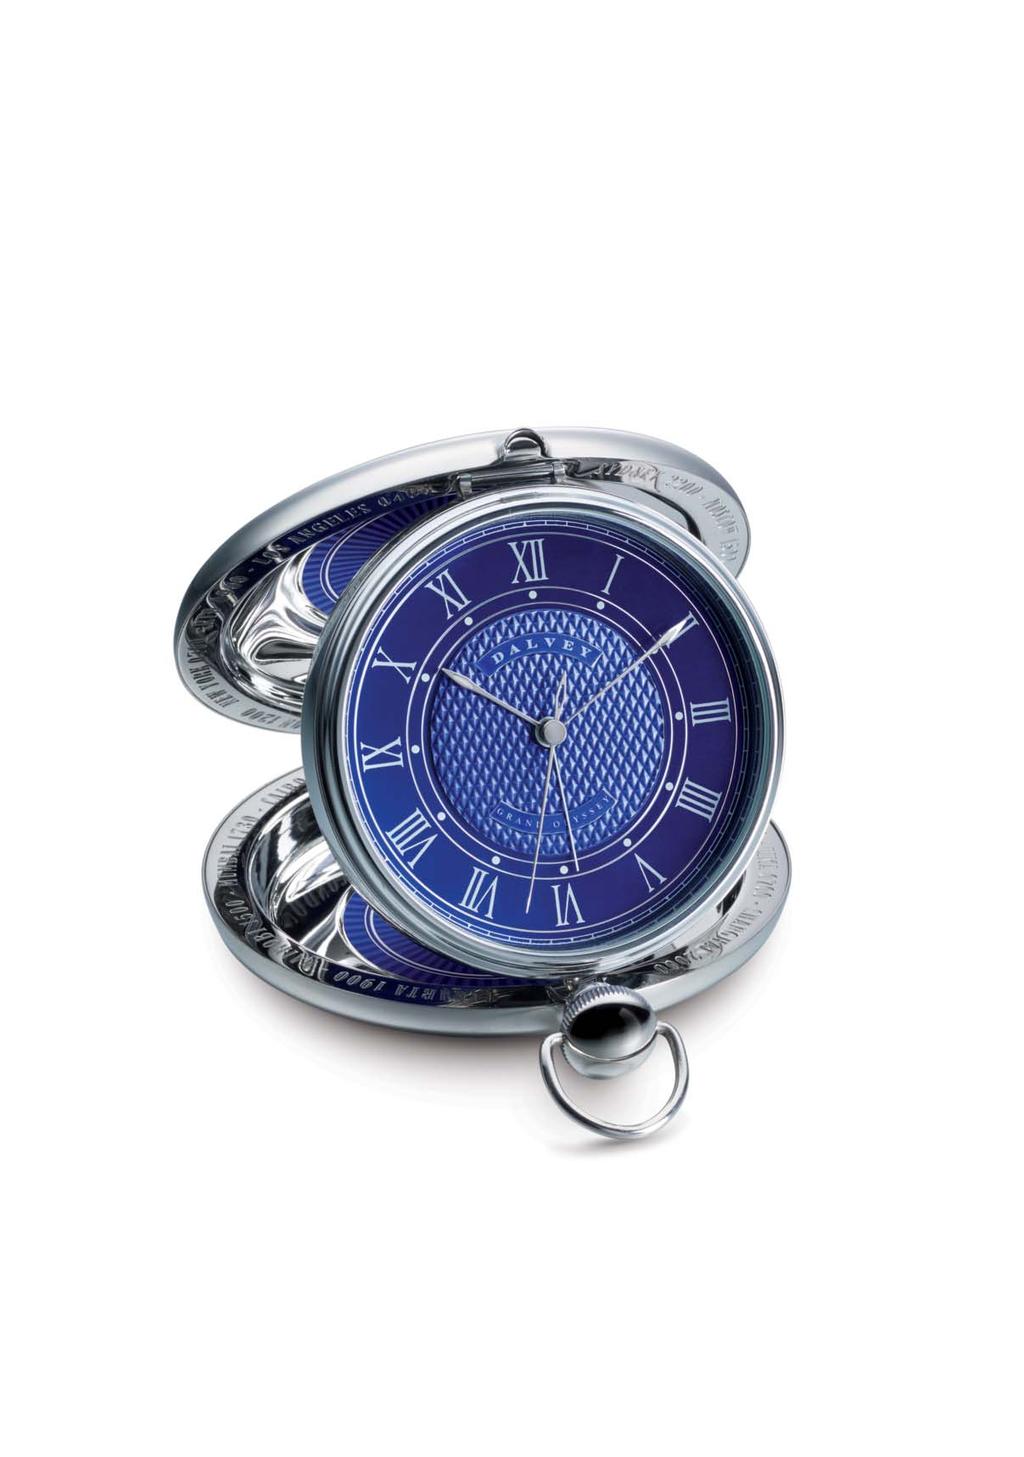 GRAND ODYSSEY CLOCK Redesigned in refined black, and a richly opalescent blue, the Grand